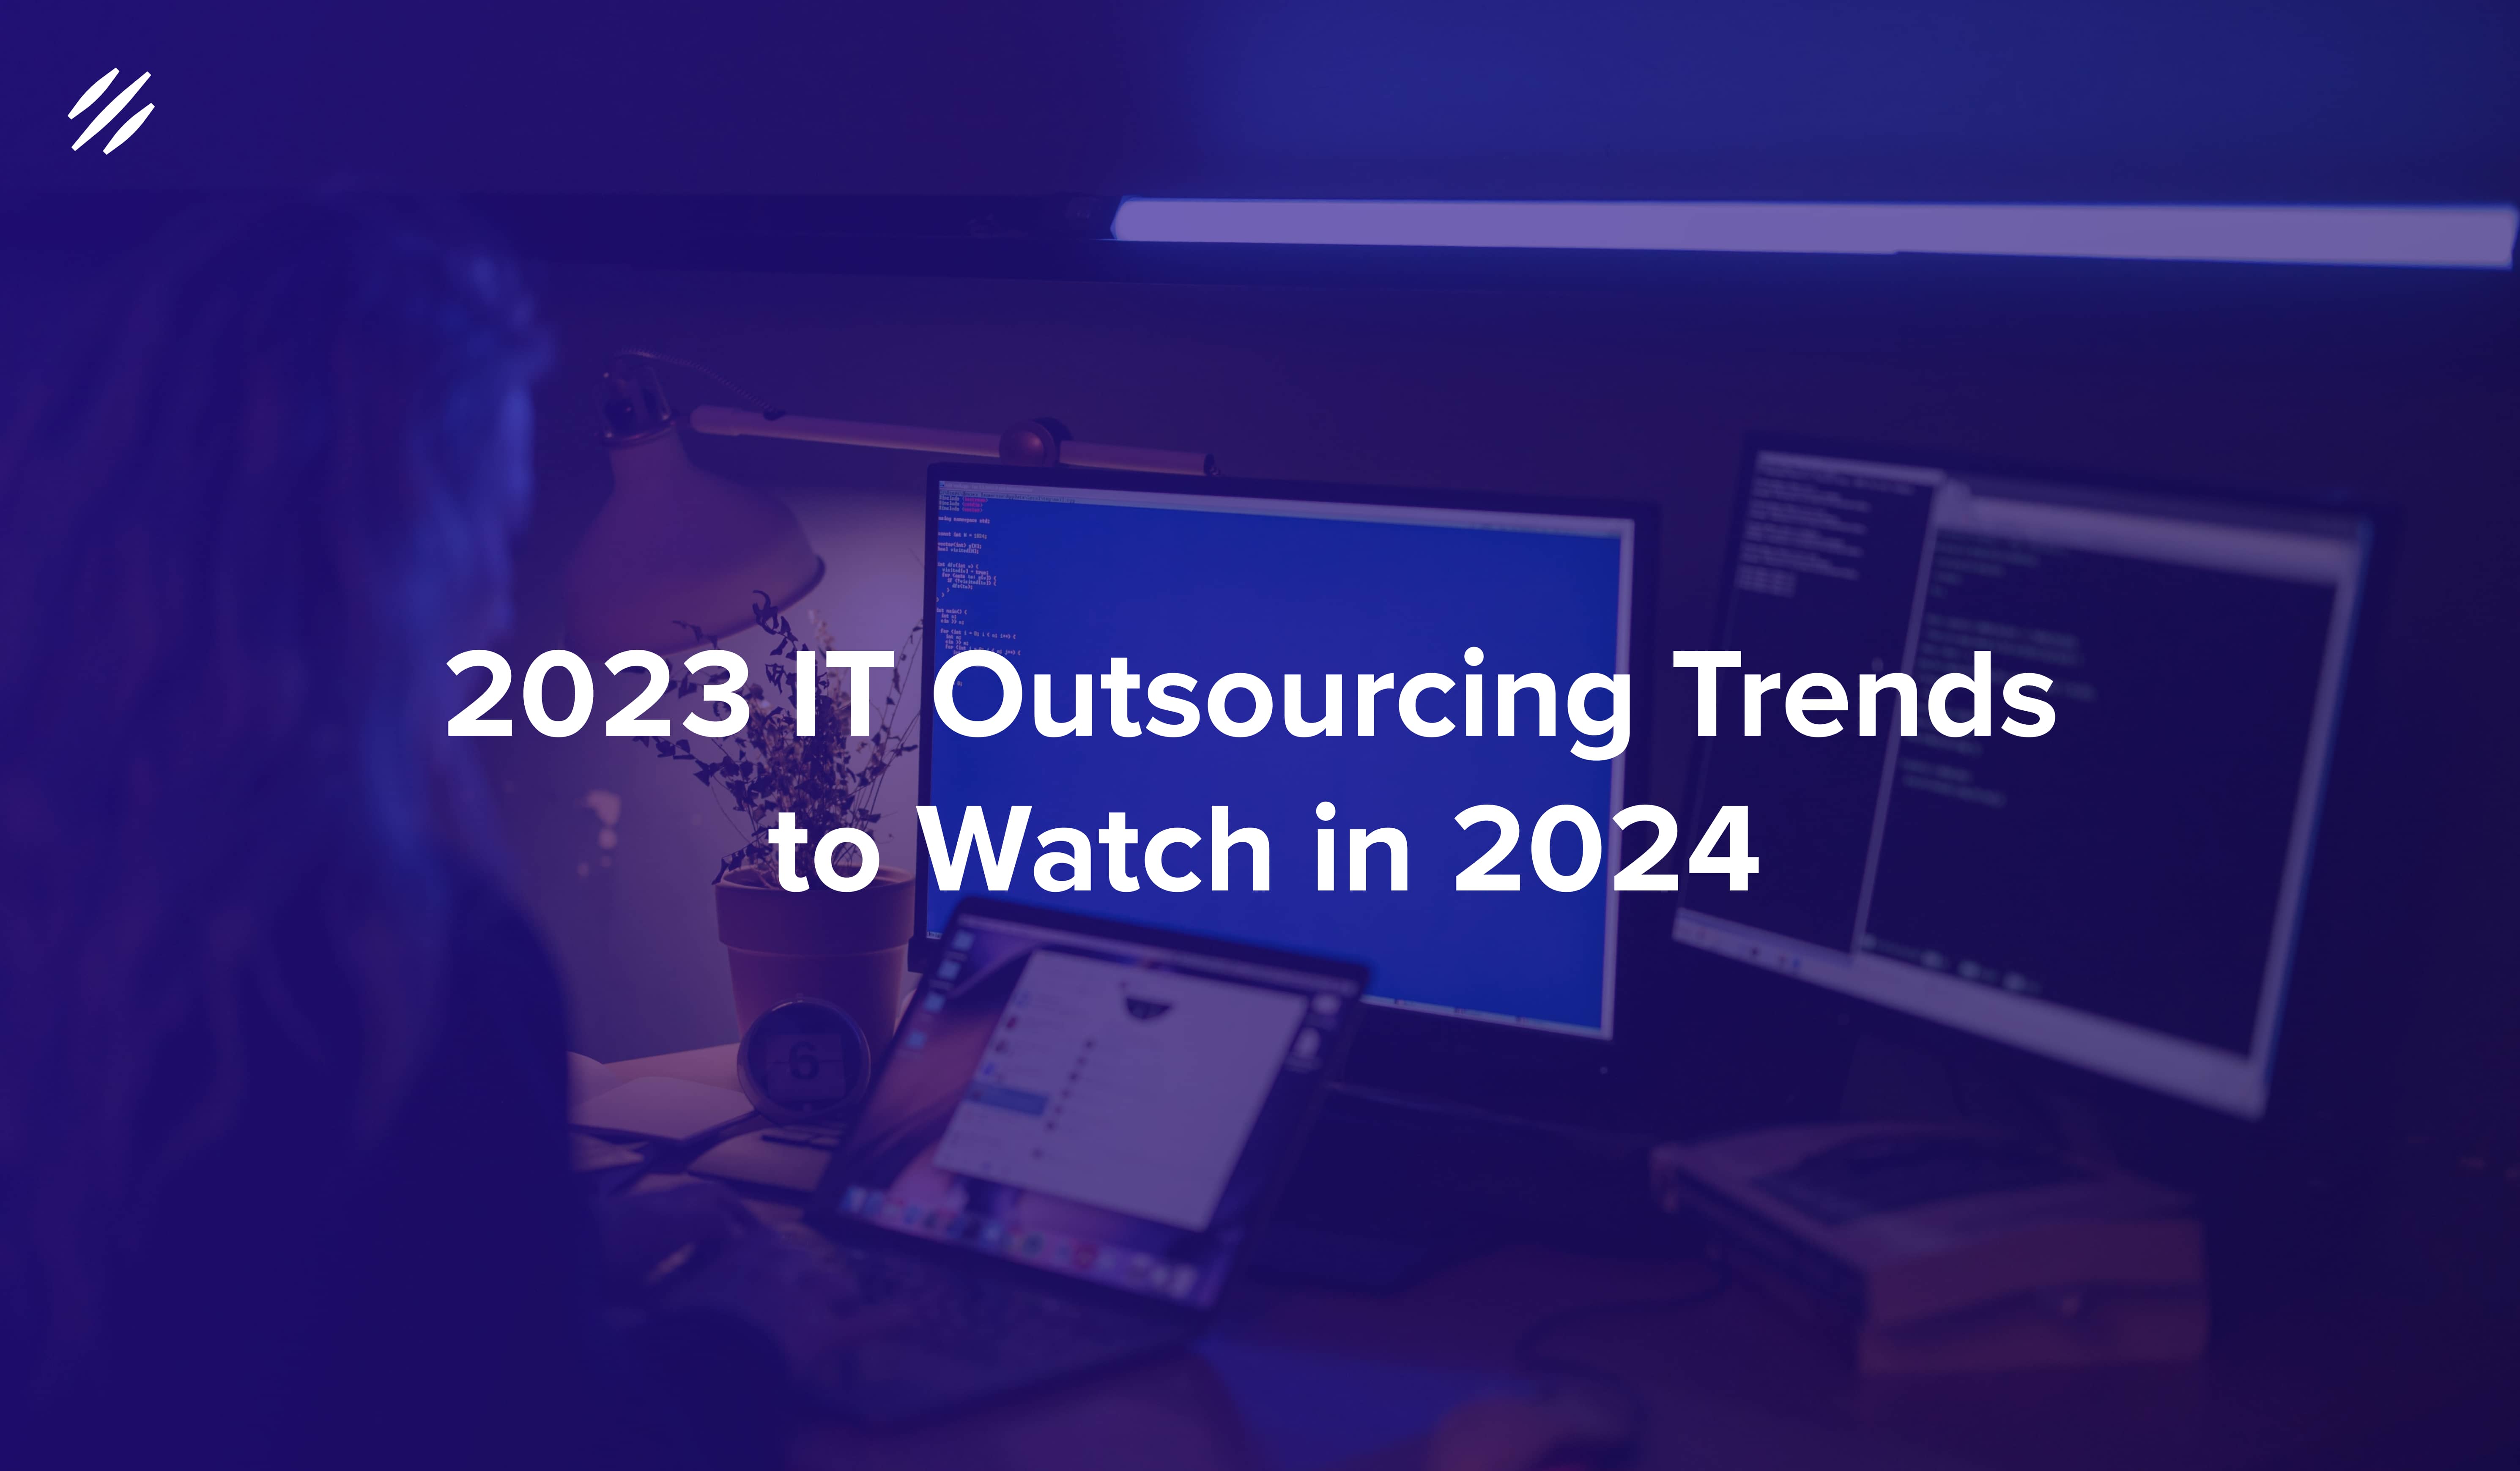 2023 IT Outsourcing Trends to Watch in 2024